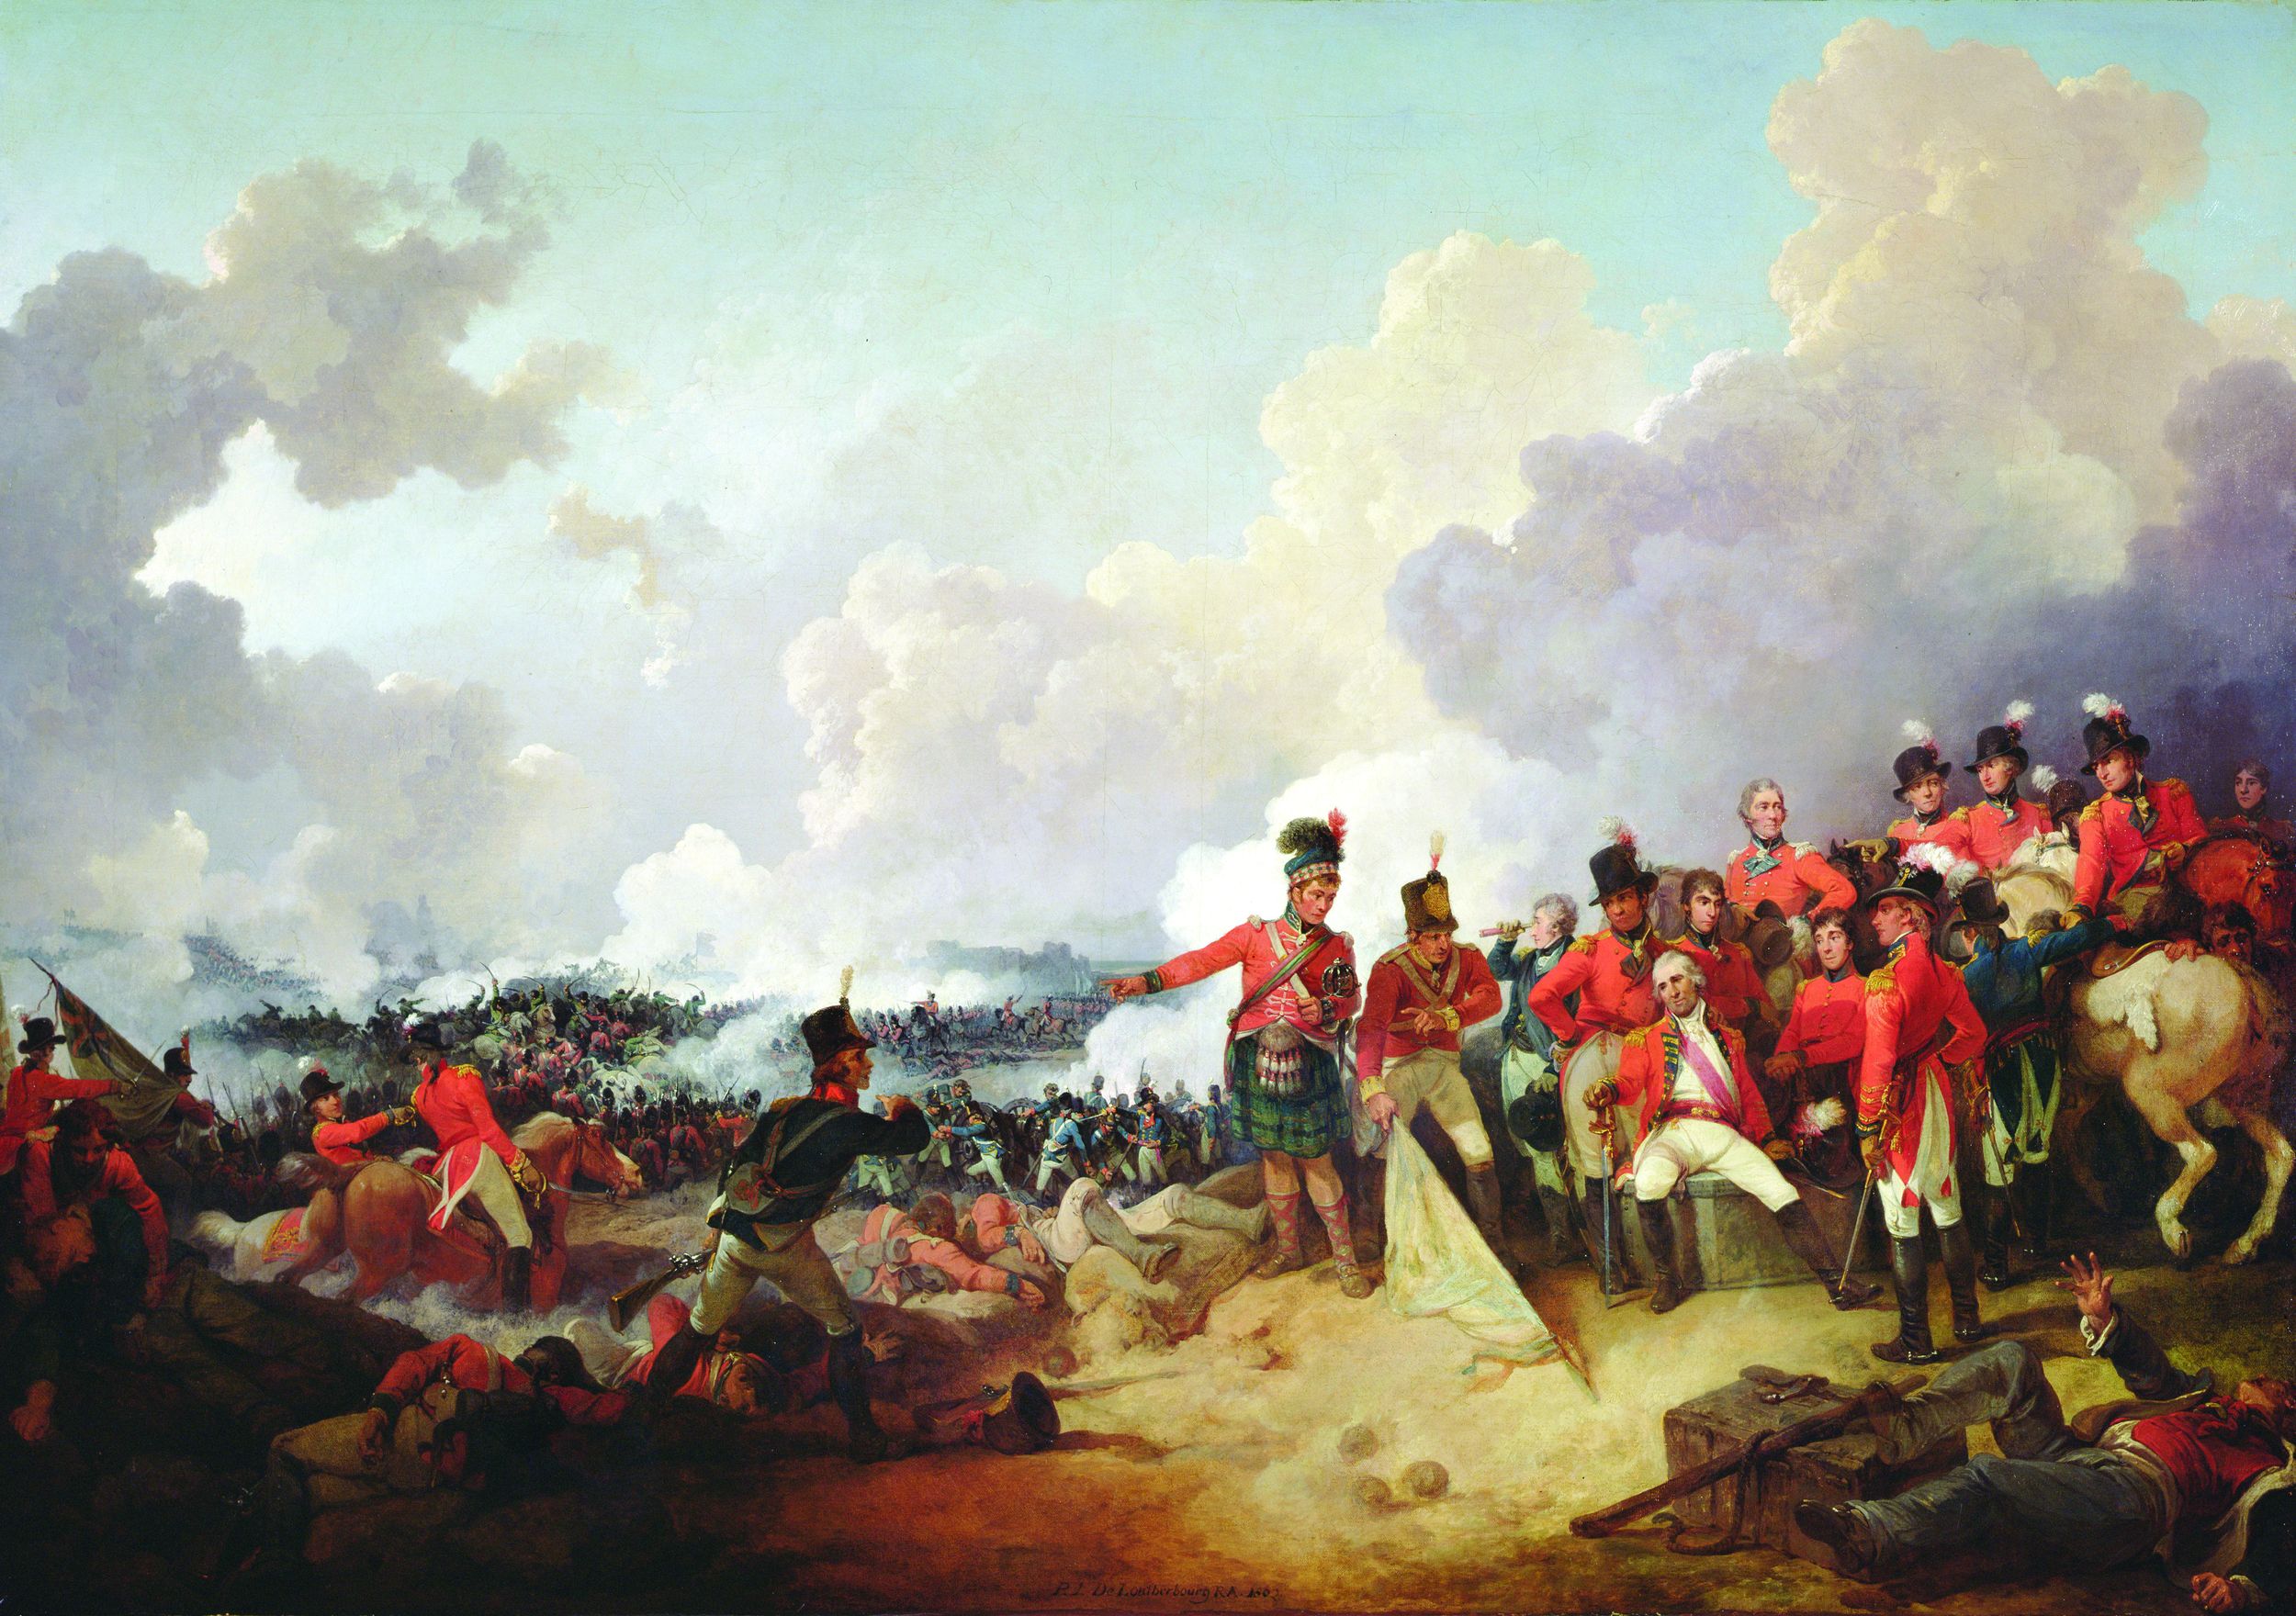 Another near-contemporaneous painting of the Battle of Alexandria by artist Philippe Jacques de Loutherbourg. General Sir Ralph Abercromby, seated center, has suffered a fatal leg wound.